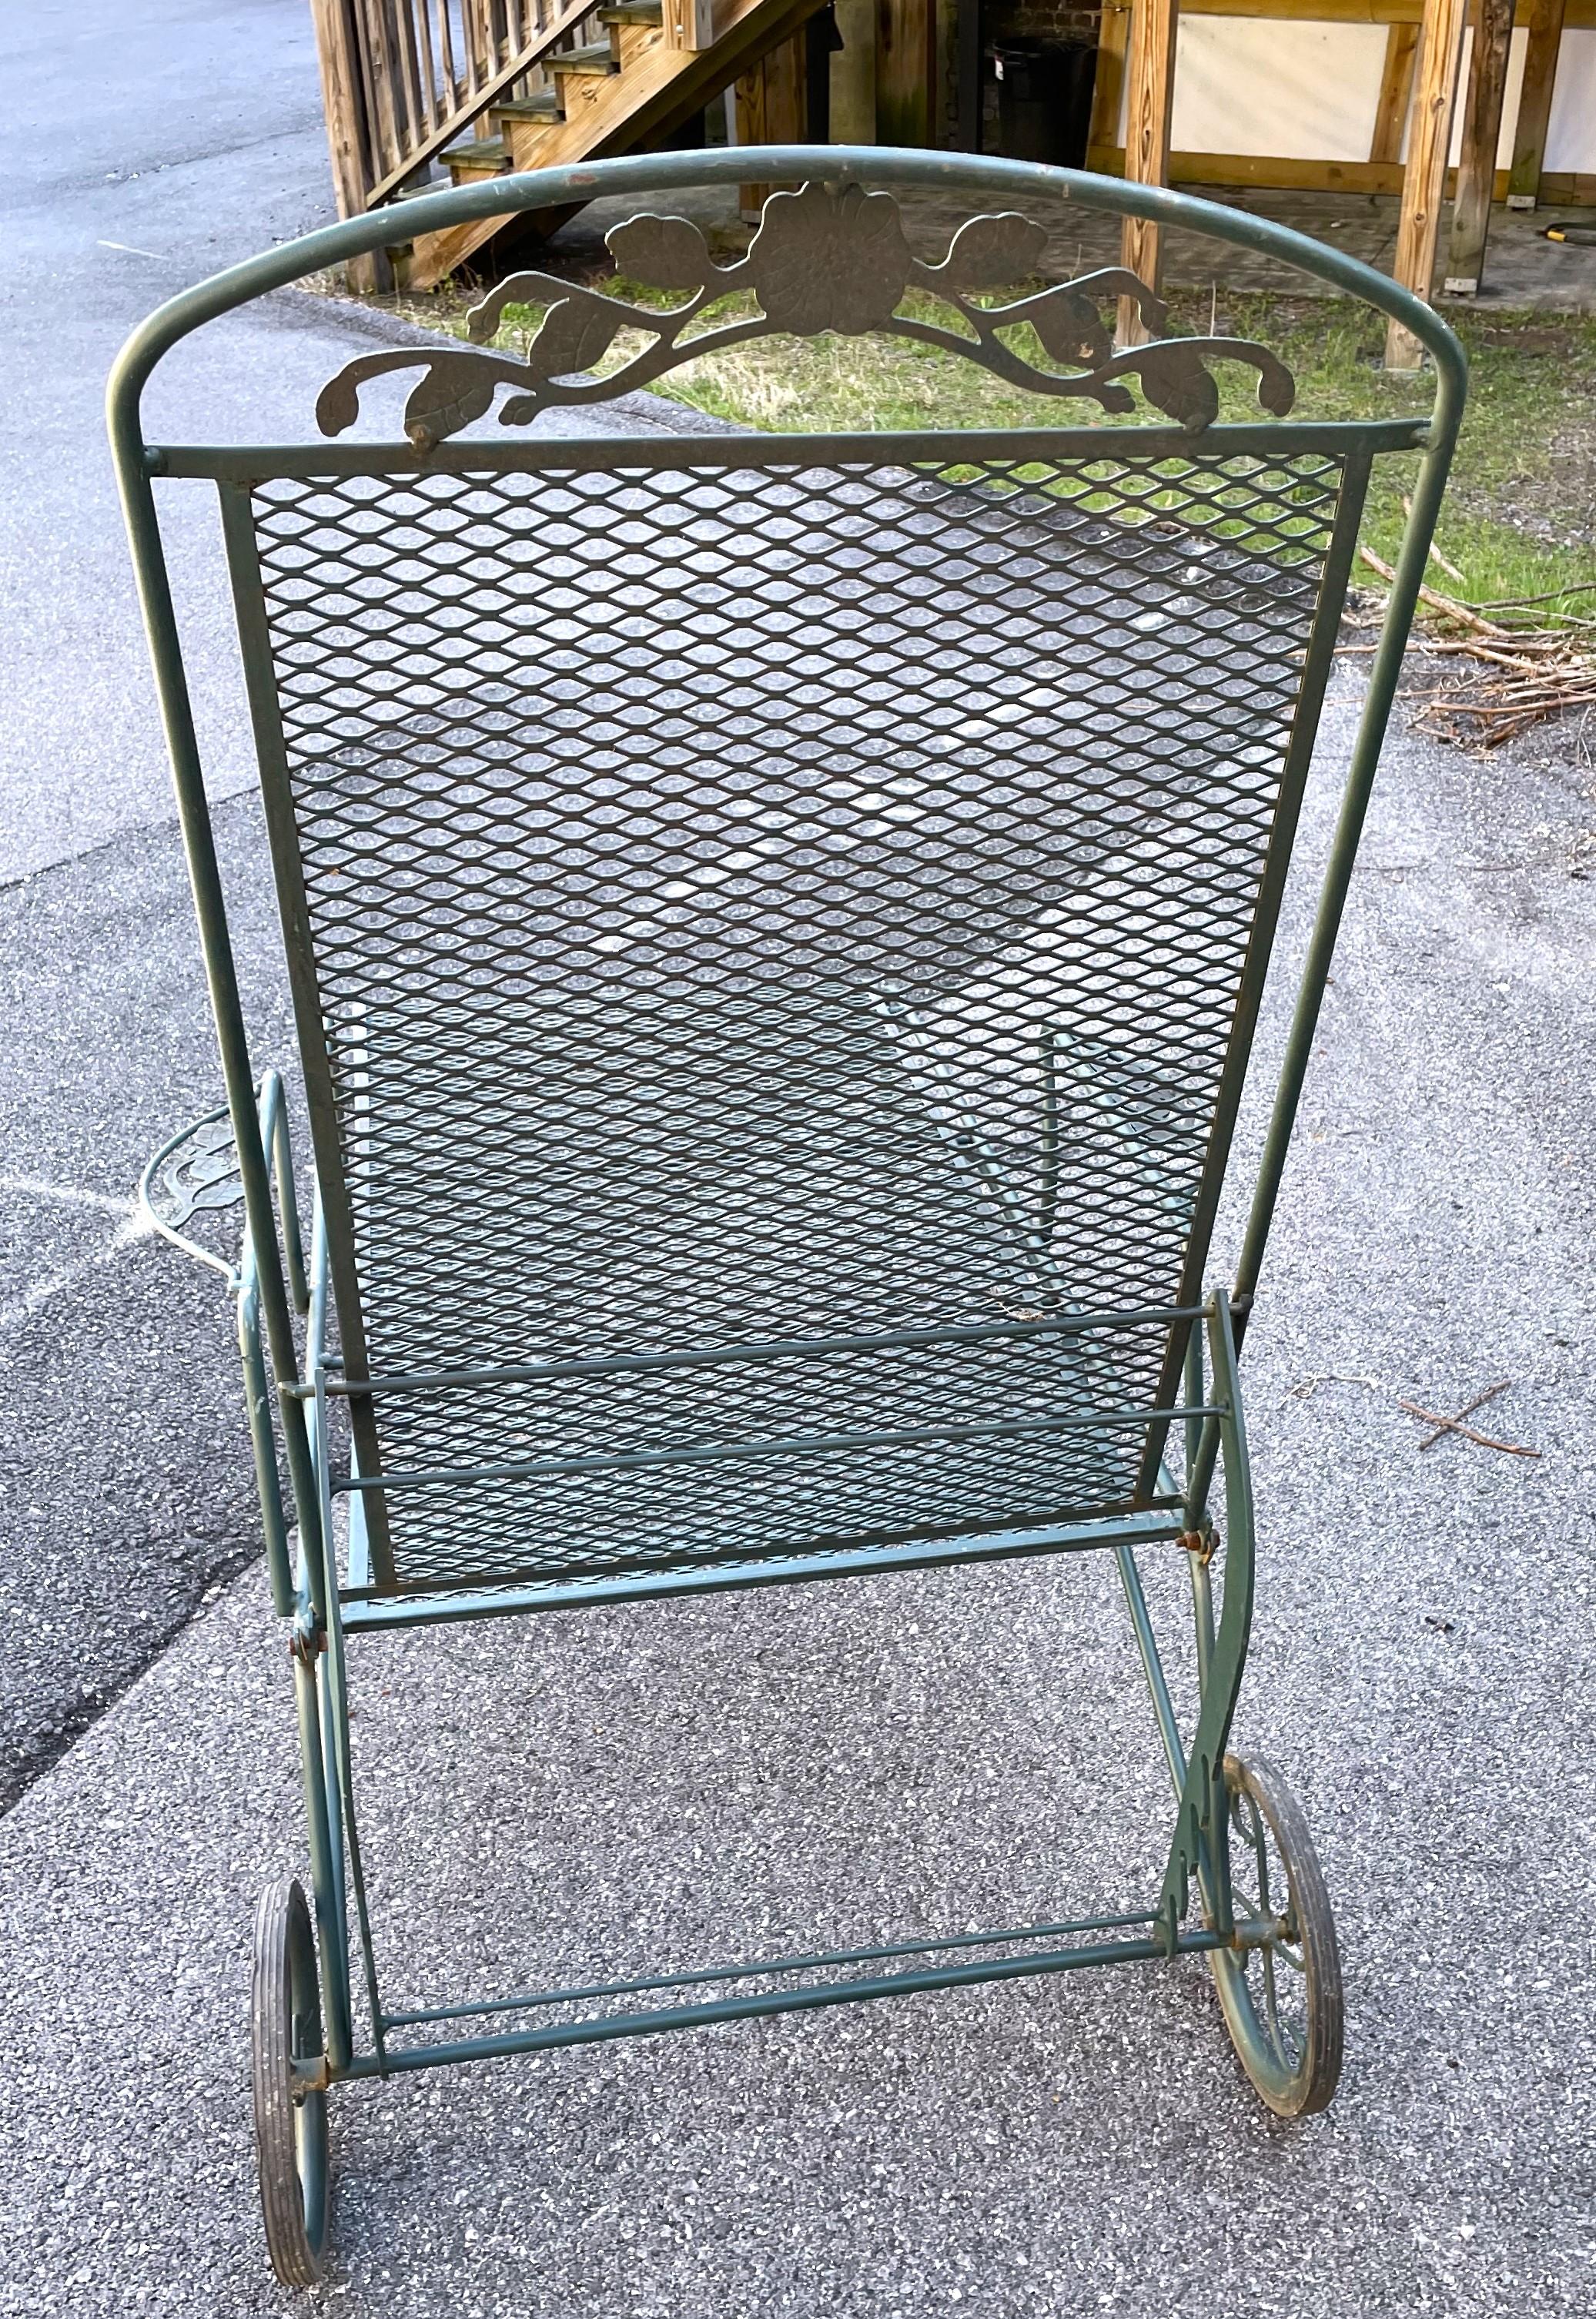 Hunter Green Wrought Iron Chaise Lounge w/ Floral Pattern Patio Outdoor In Good Condition For Sale In Clifton Forge, VA